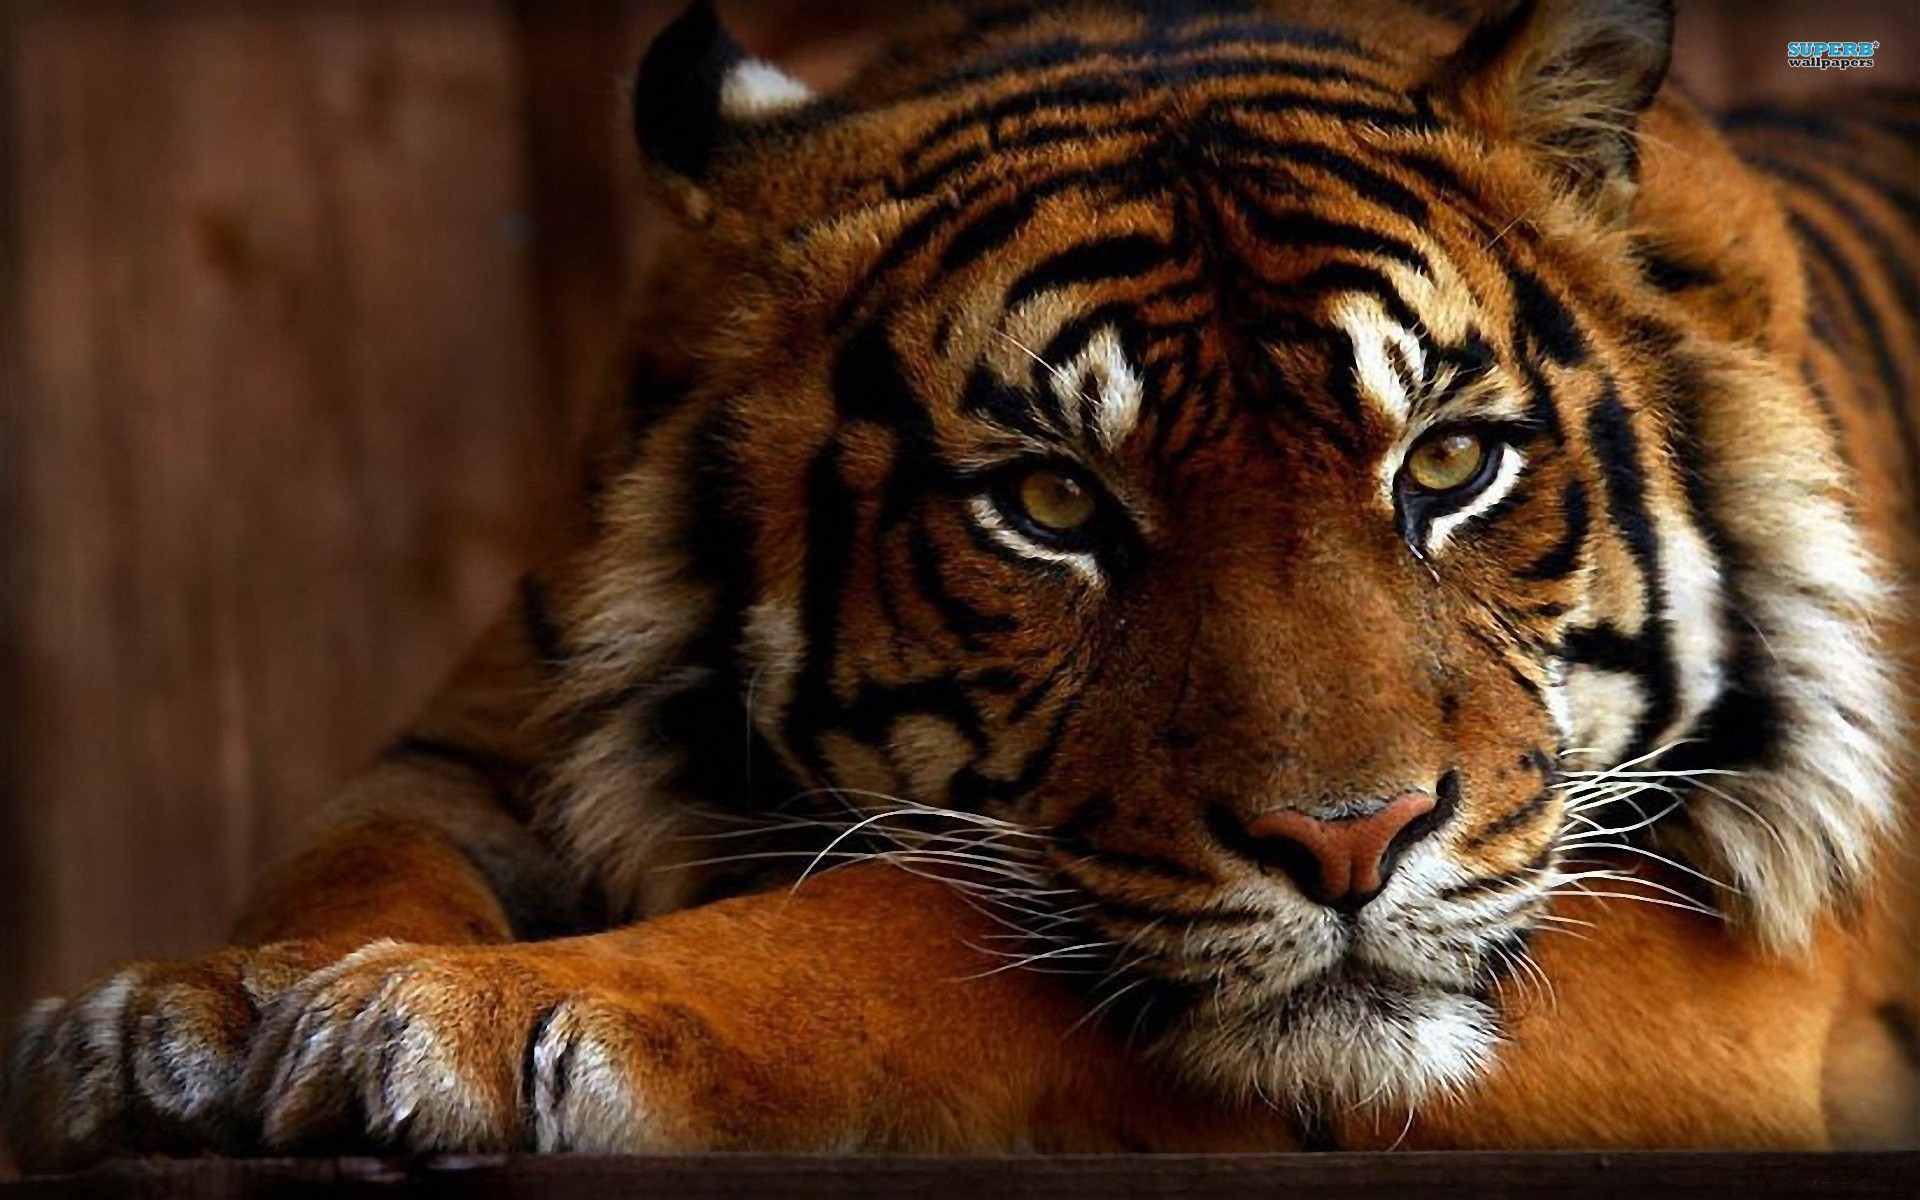  animals and cats you will like this cool and awesome tiger wallpaper